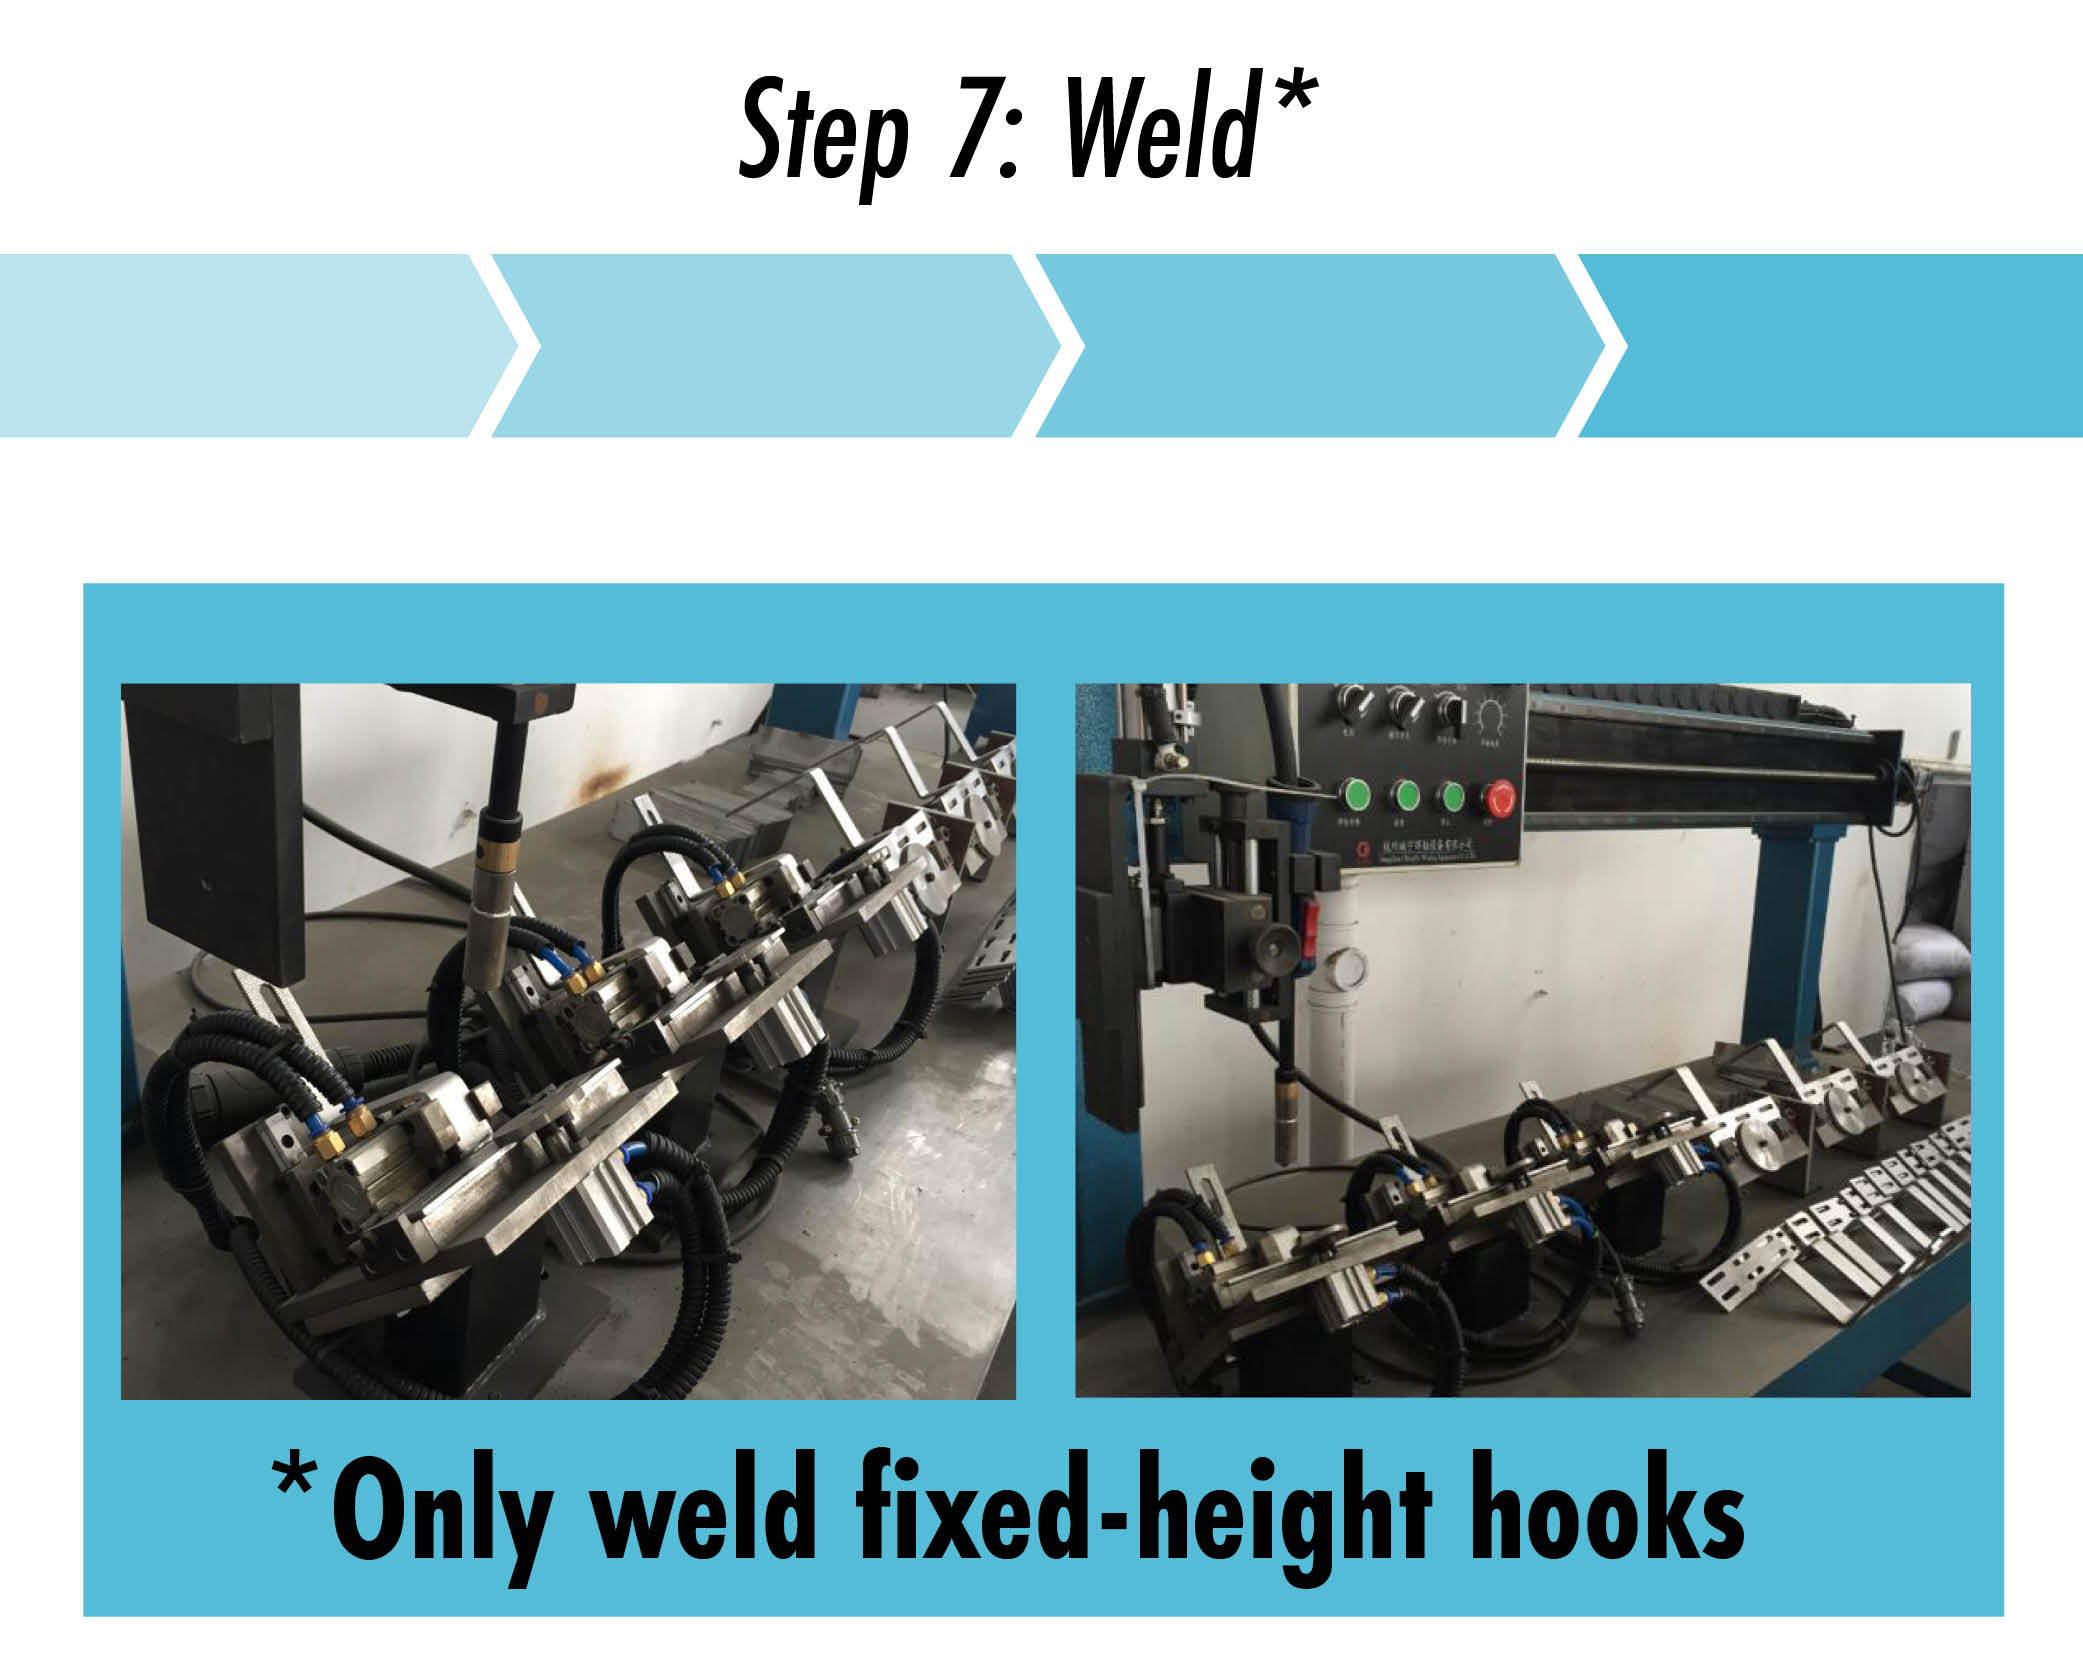 step 7 weld arm and base together for fixed height hooks